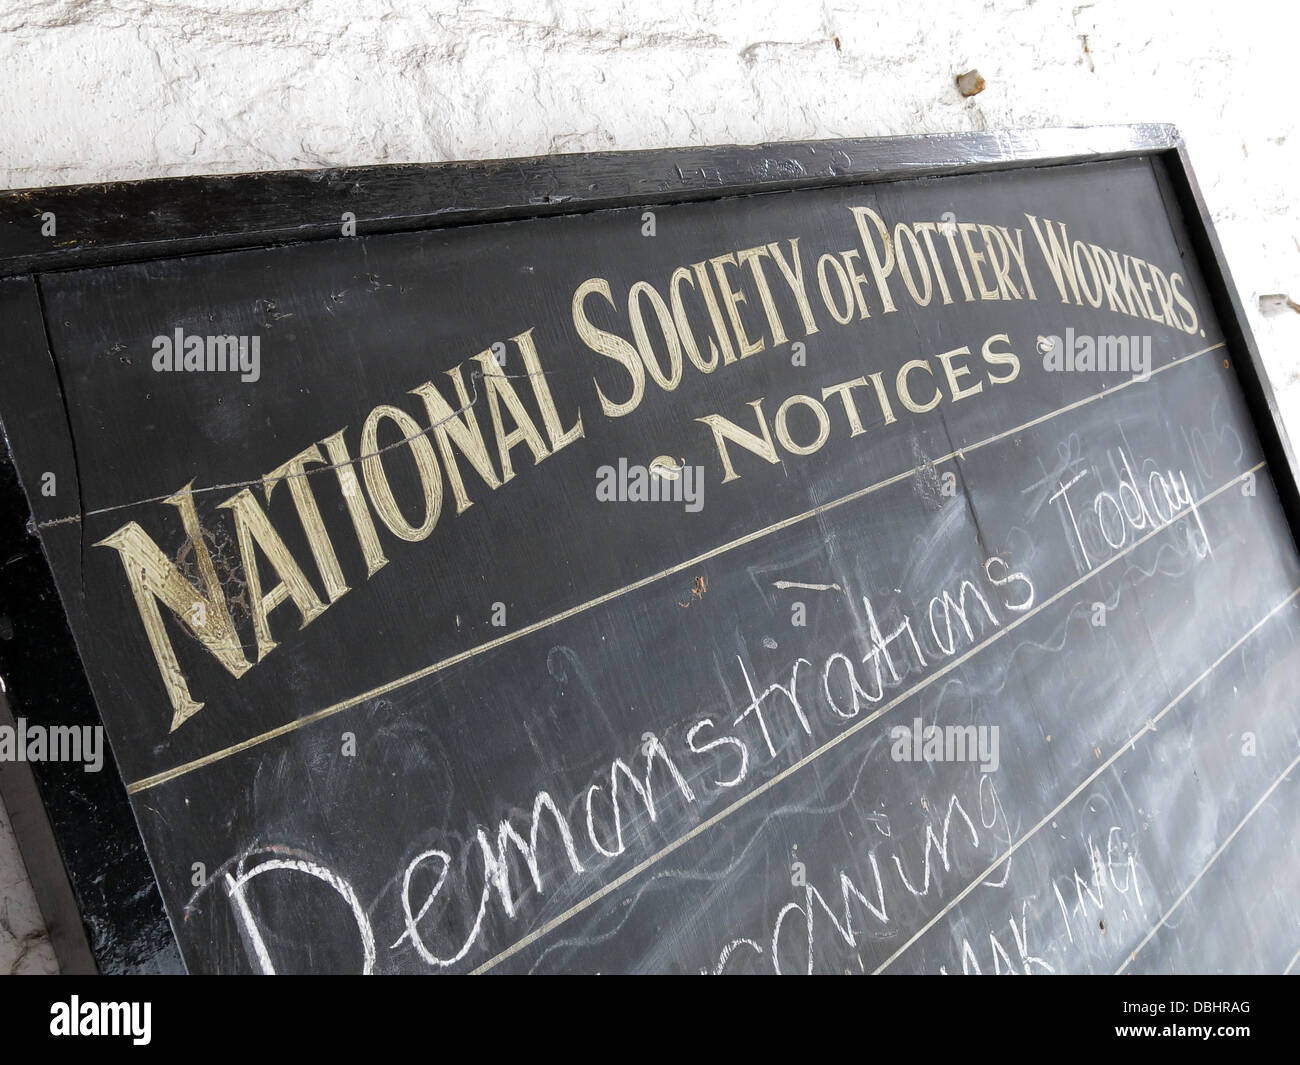 National Society of Pottery Workers notice board from Longton Stoke-On-Trent Great Britain  at the Gladstone Pottery Museum Stock Photo